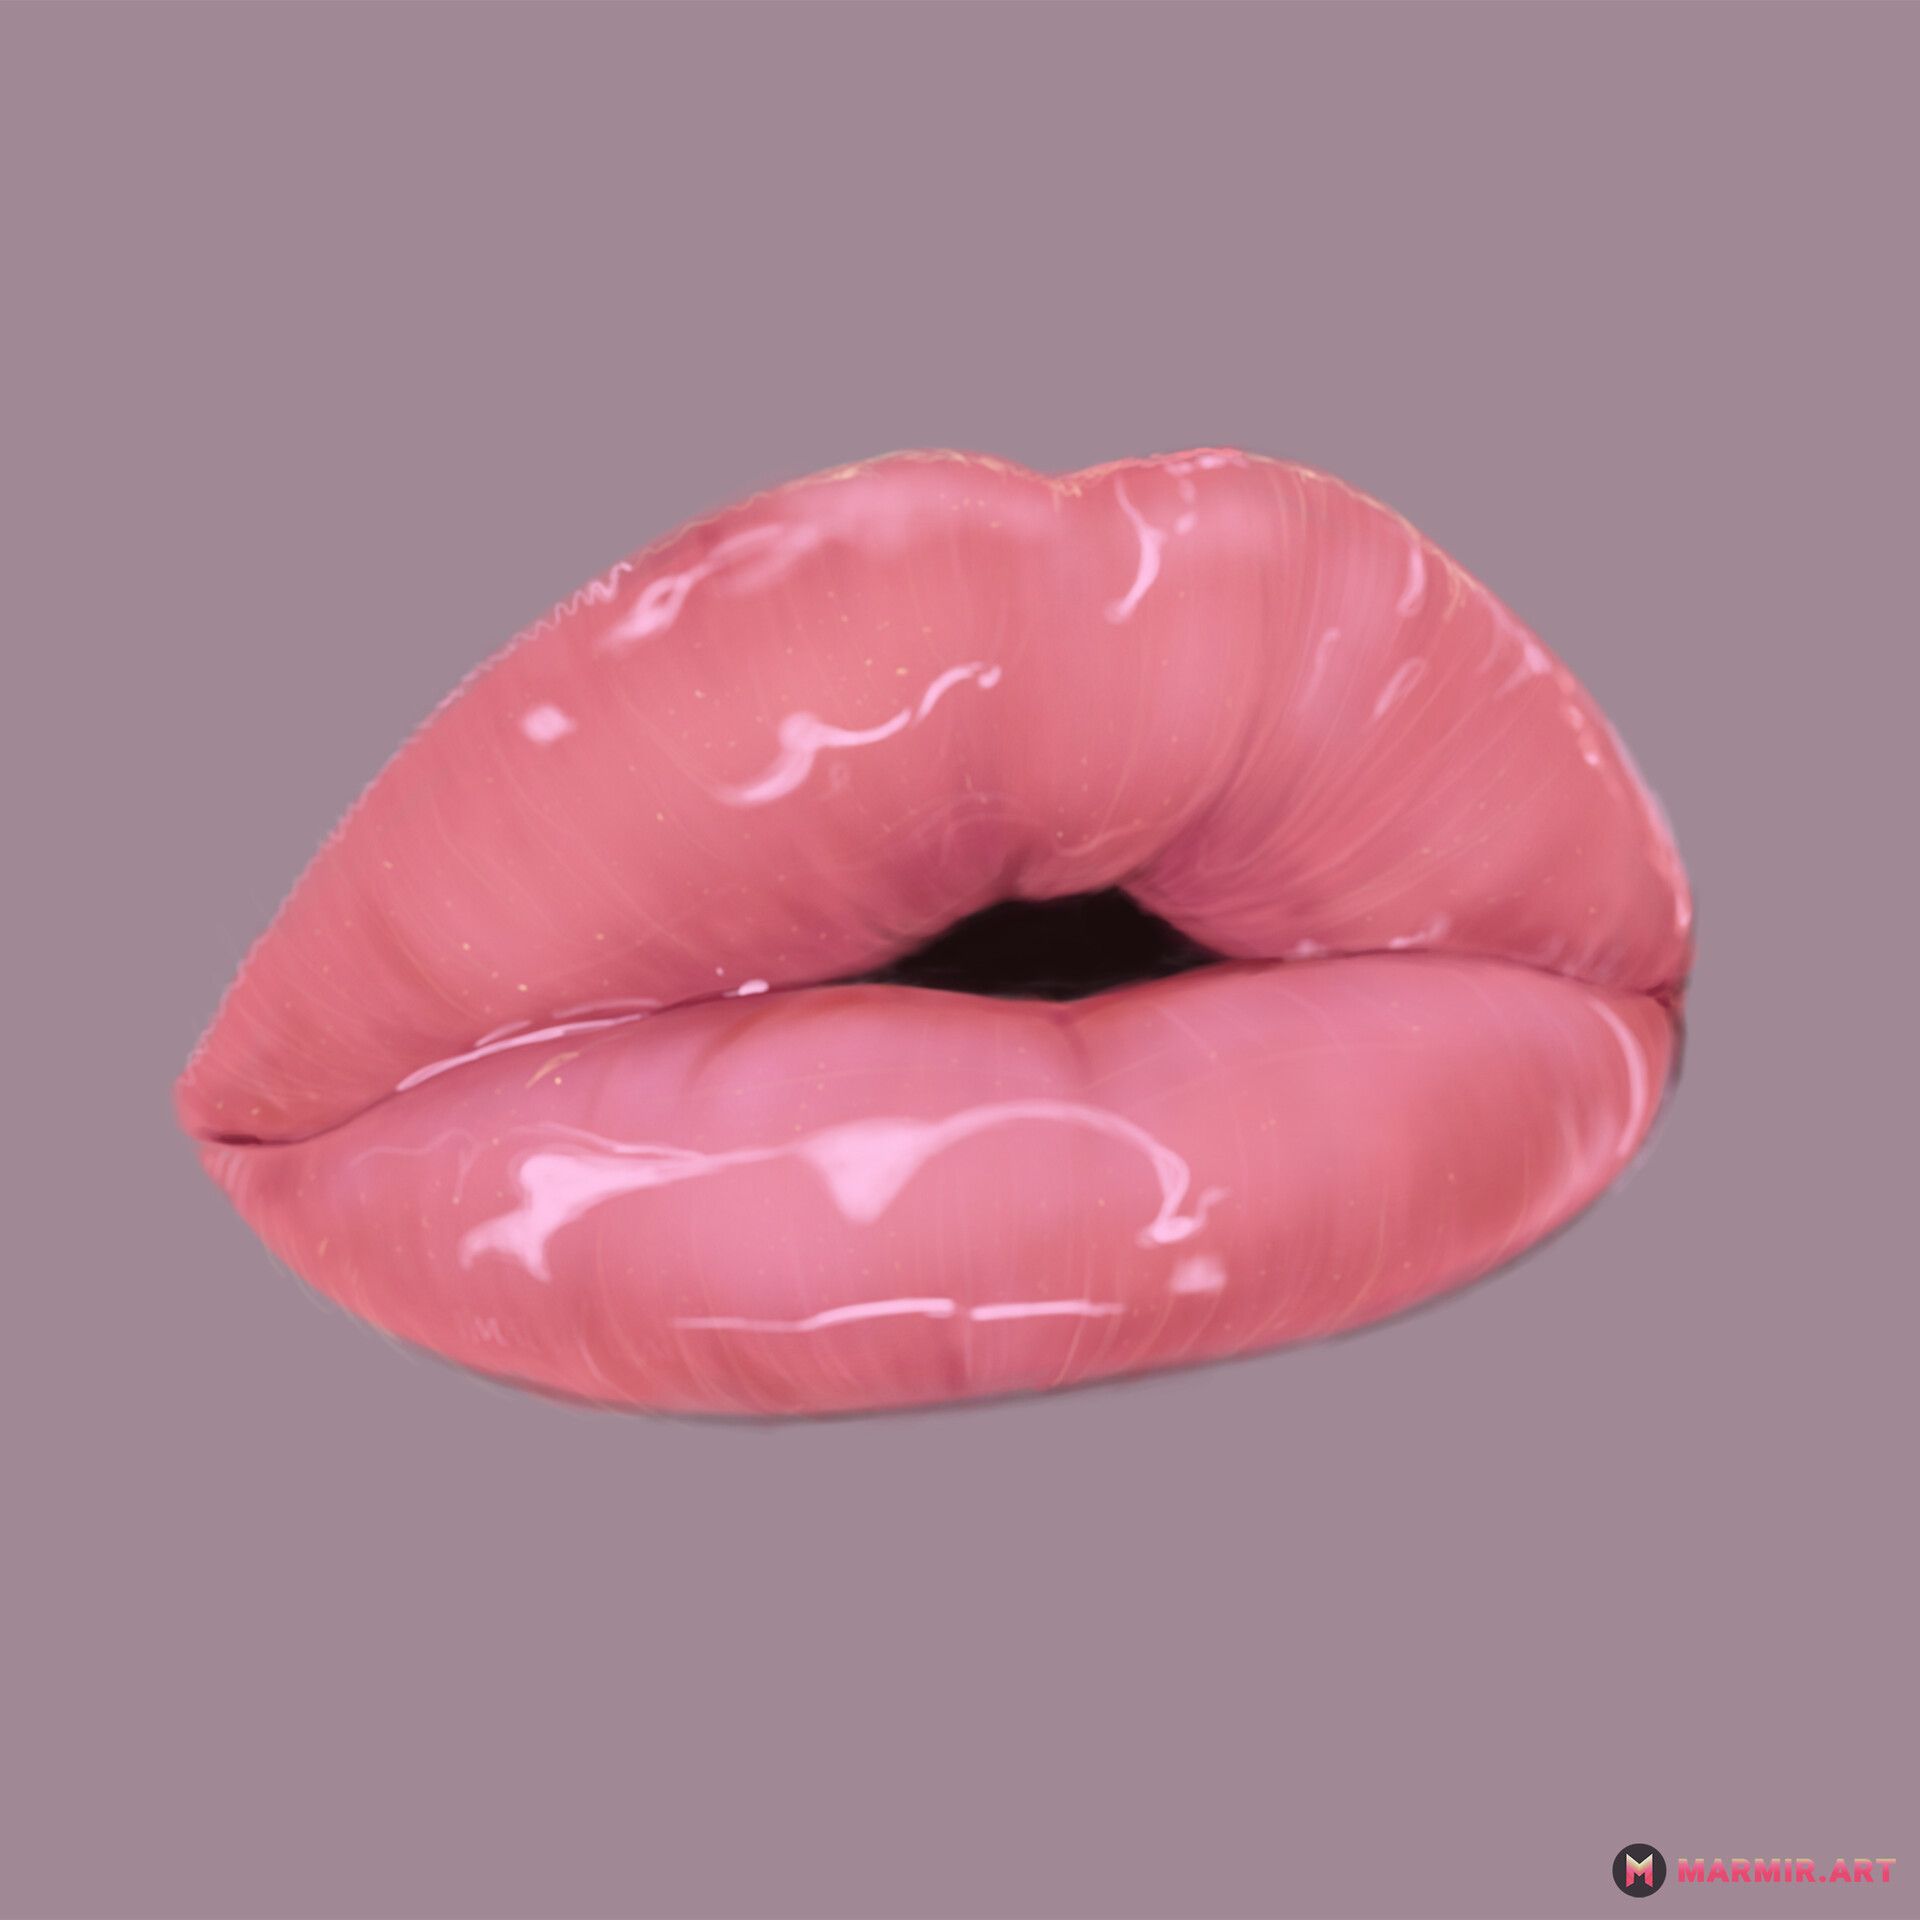 A pair of glossy pink lips on a purple background - Lips